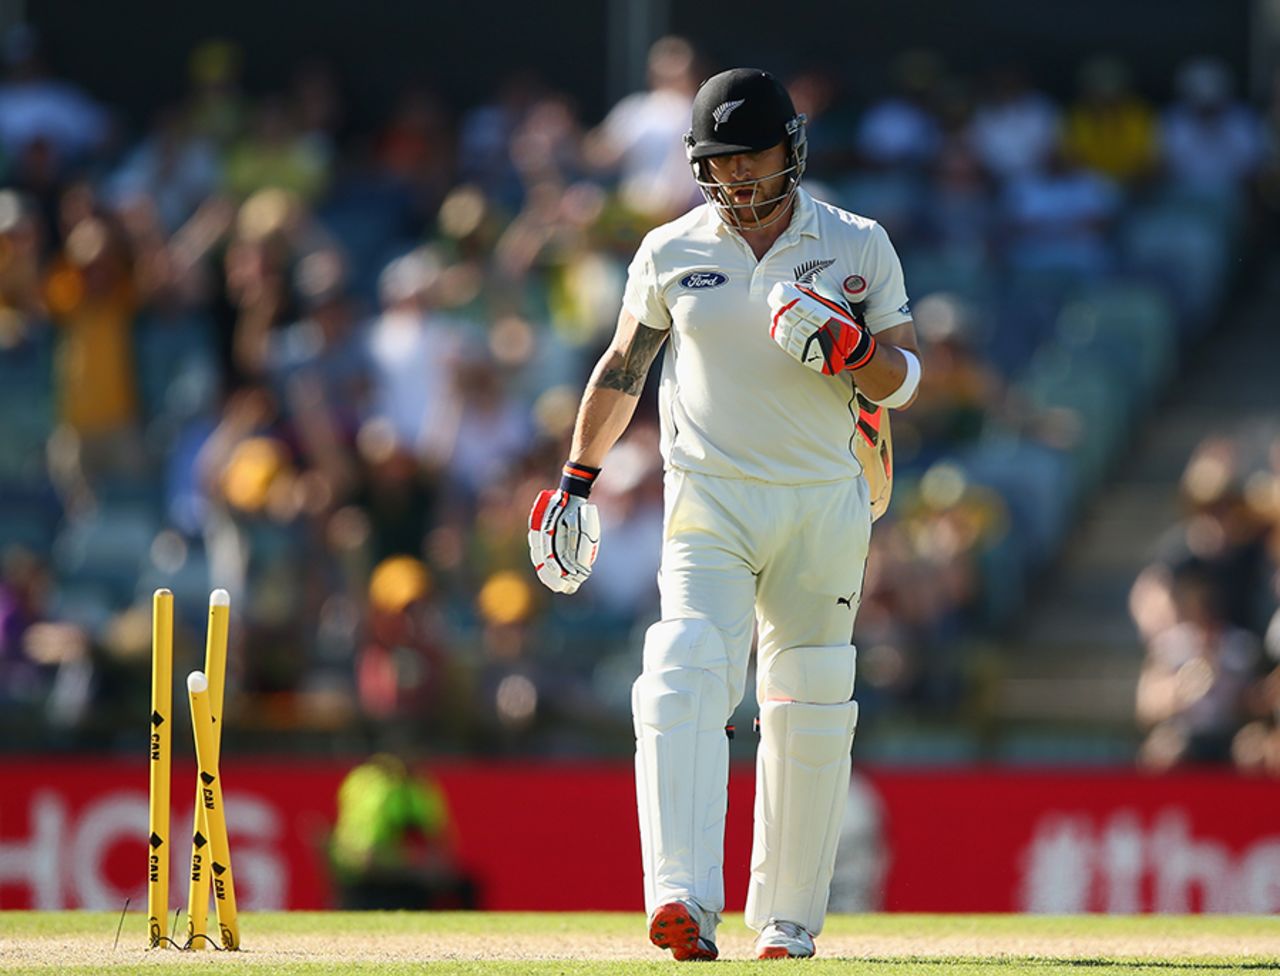 Brendon McCullum was bowled by Mitchell Marsh for 27, Australia v New Zealand, 2nd Test, Perth, 3rd day, November 15, 2015